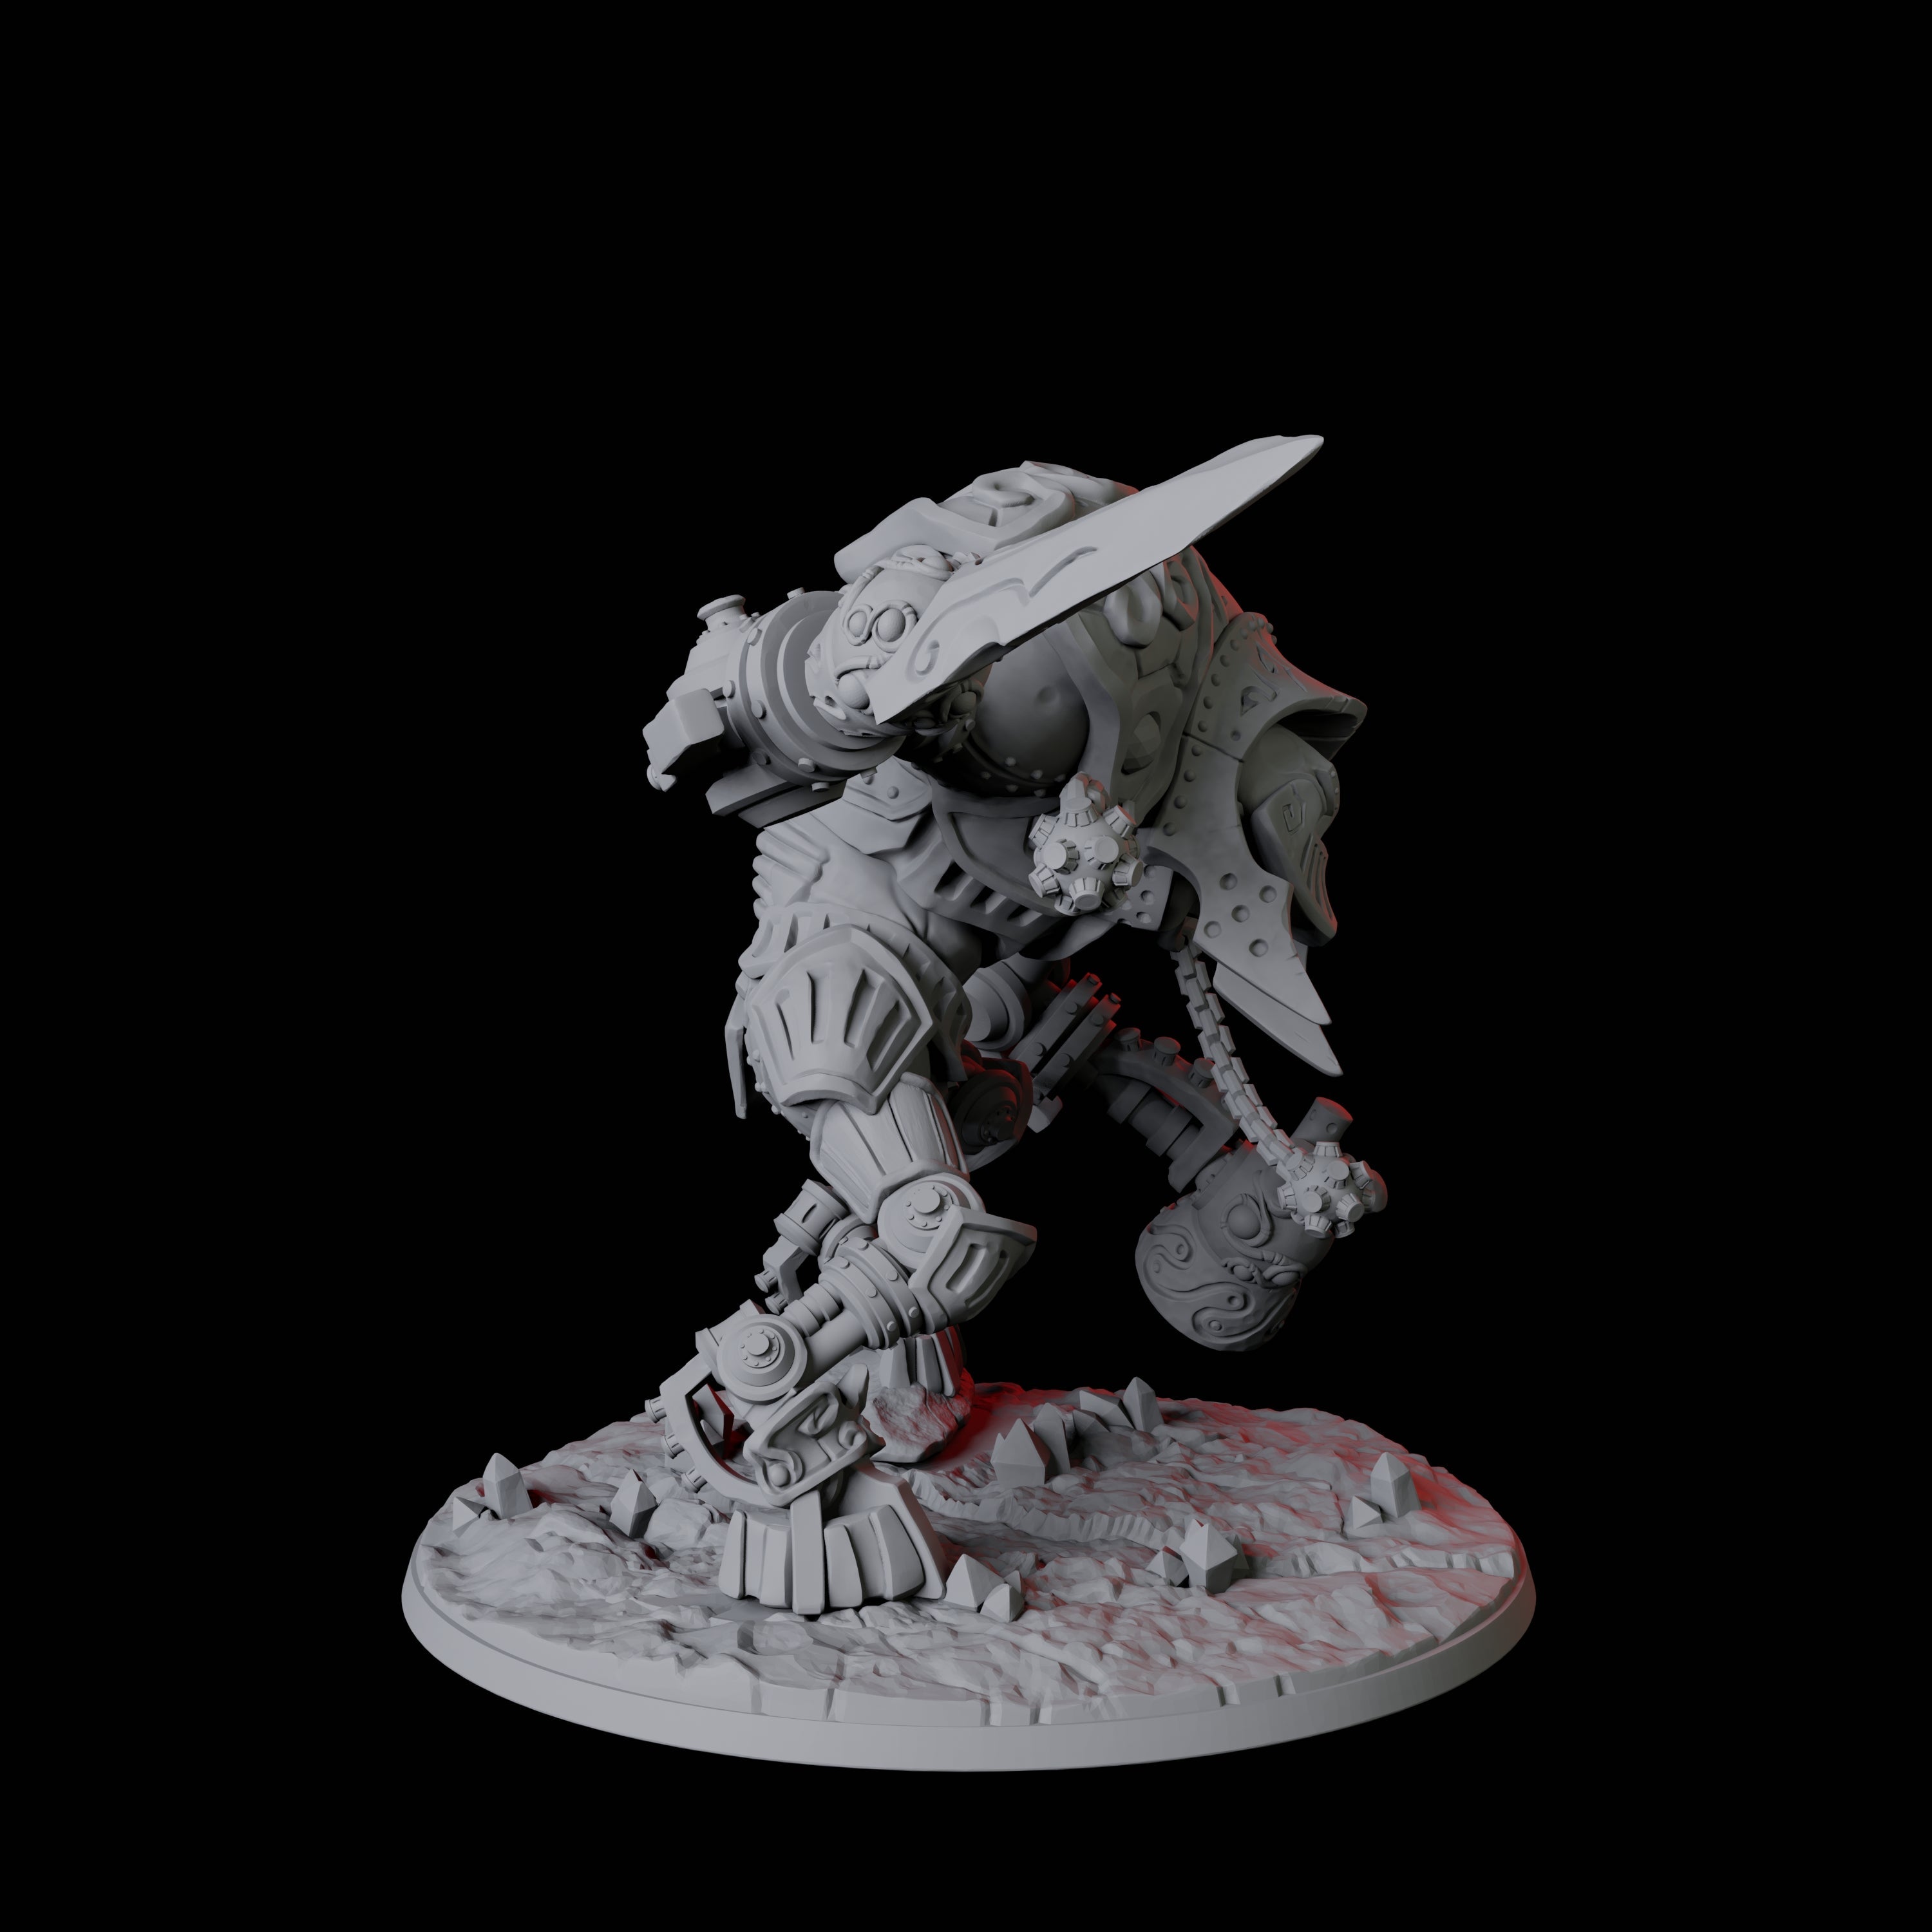 Warforged Armoured Golem Miniature for Dungeons and Dragons, Pathfinder or other TTRPGs